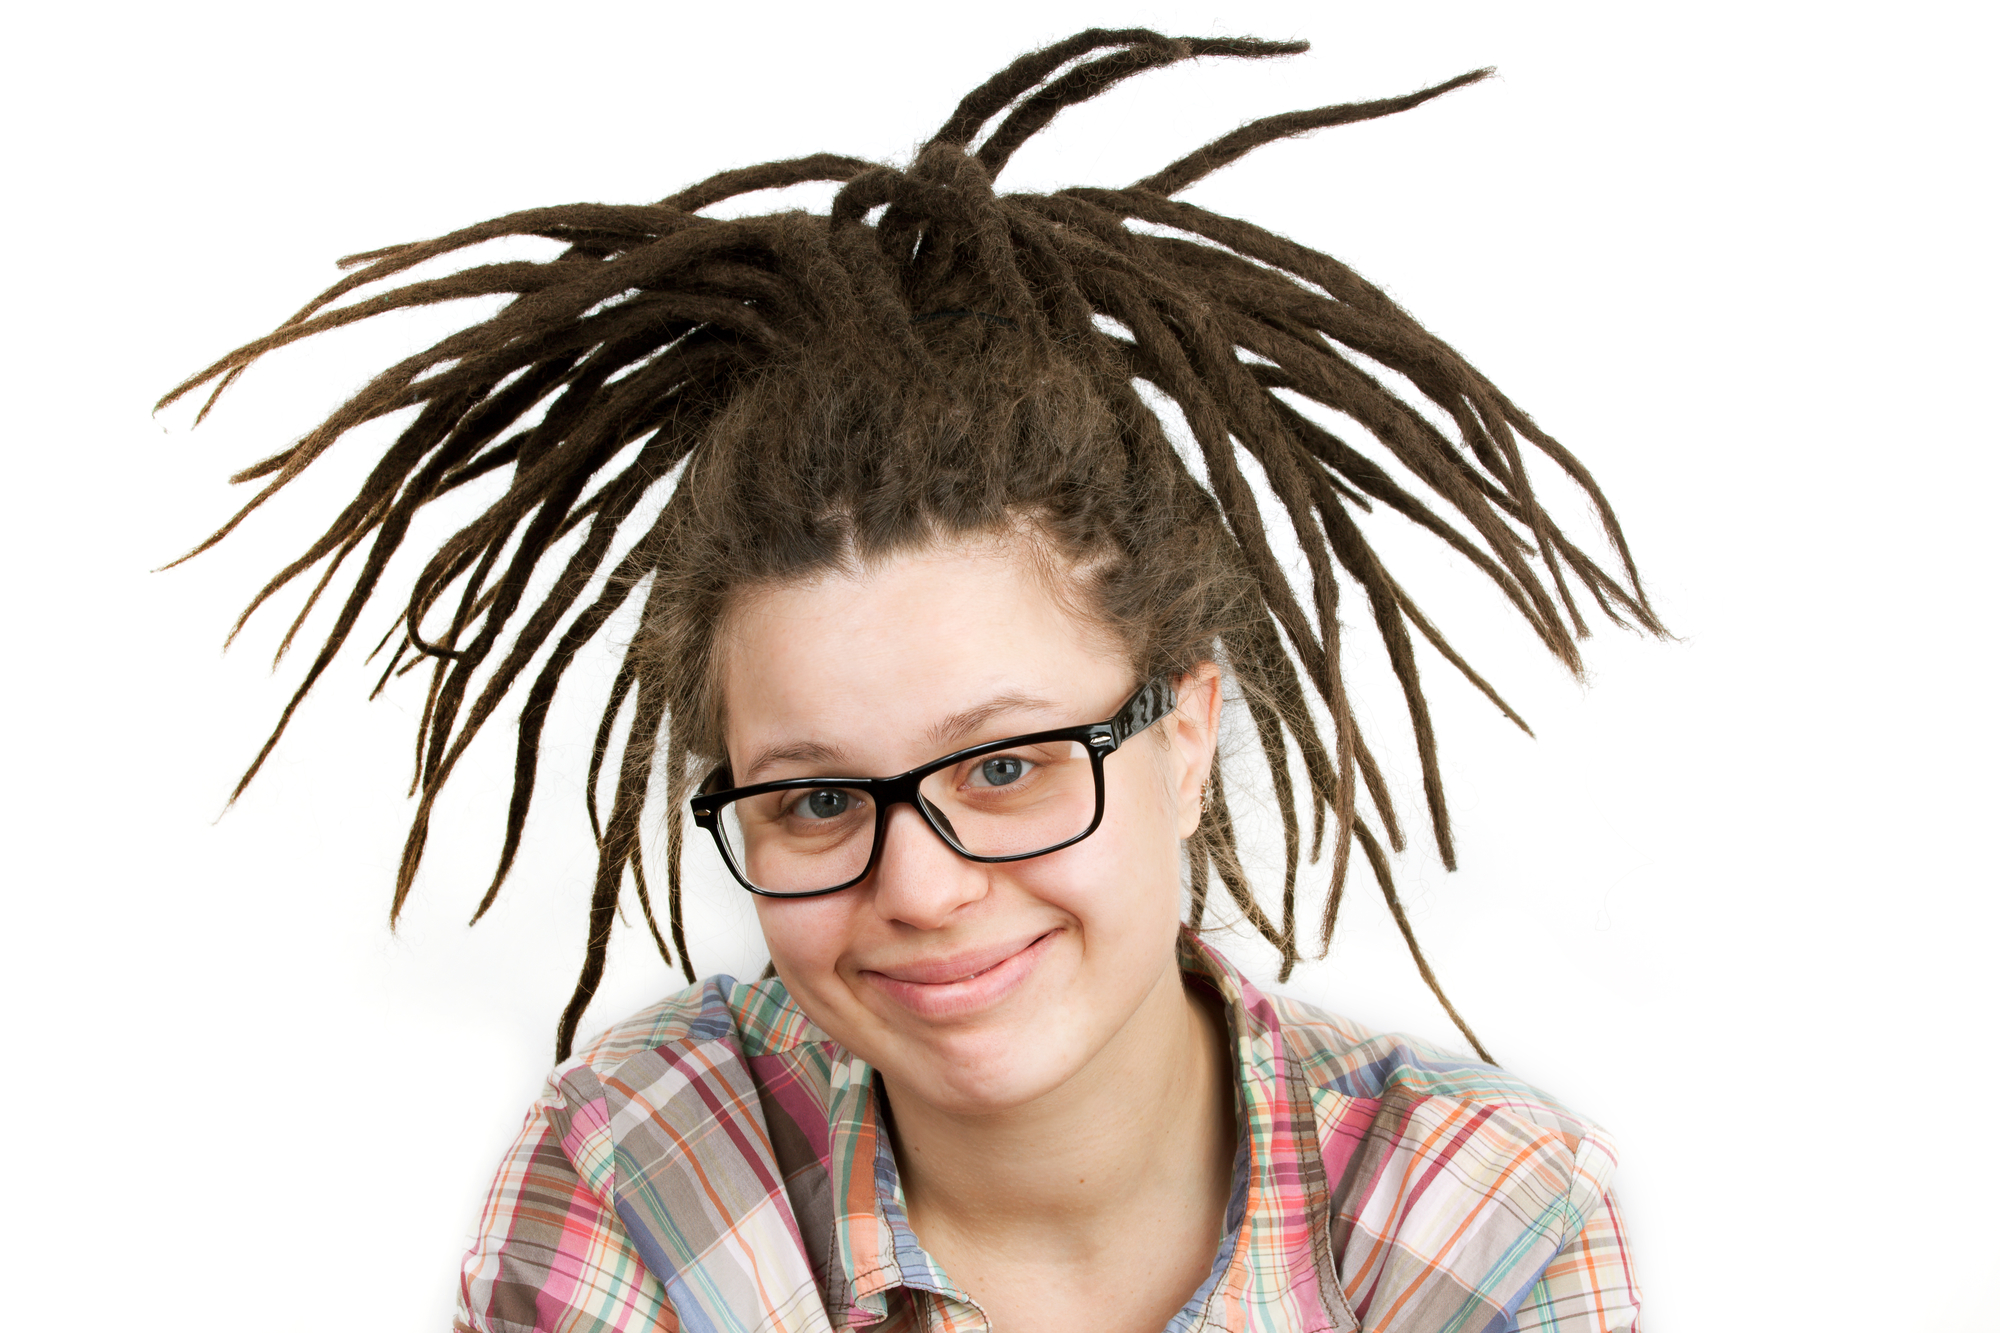 How To Use A Blow Dryer On Your Dreadlocks - Dreadlocks365